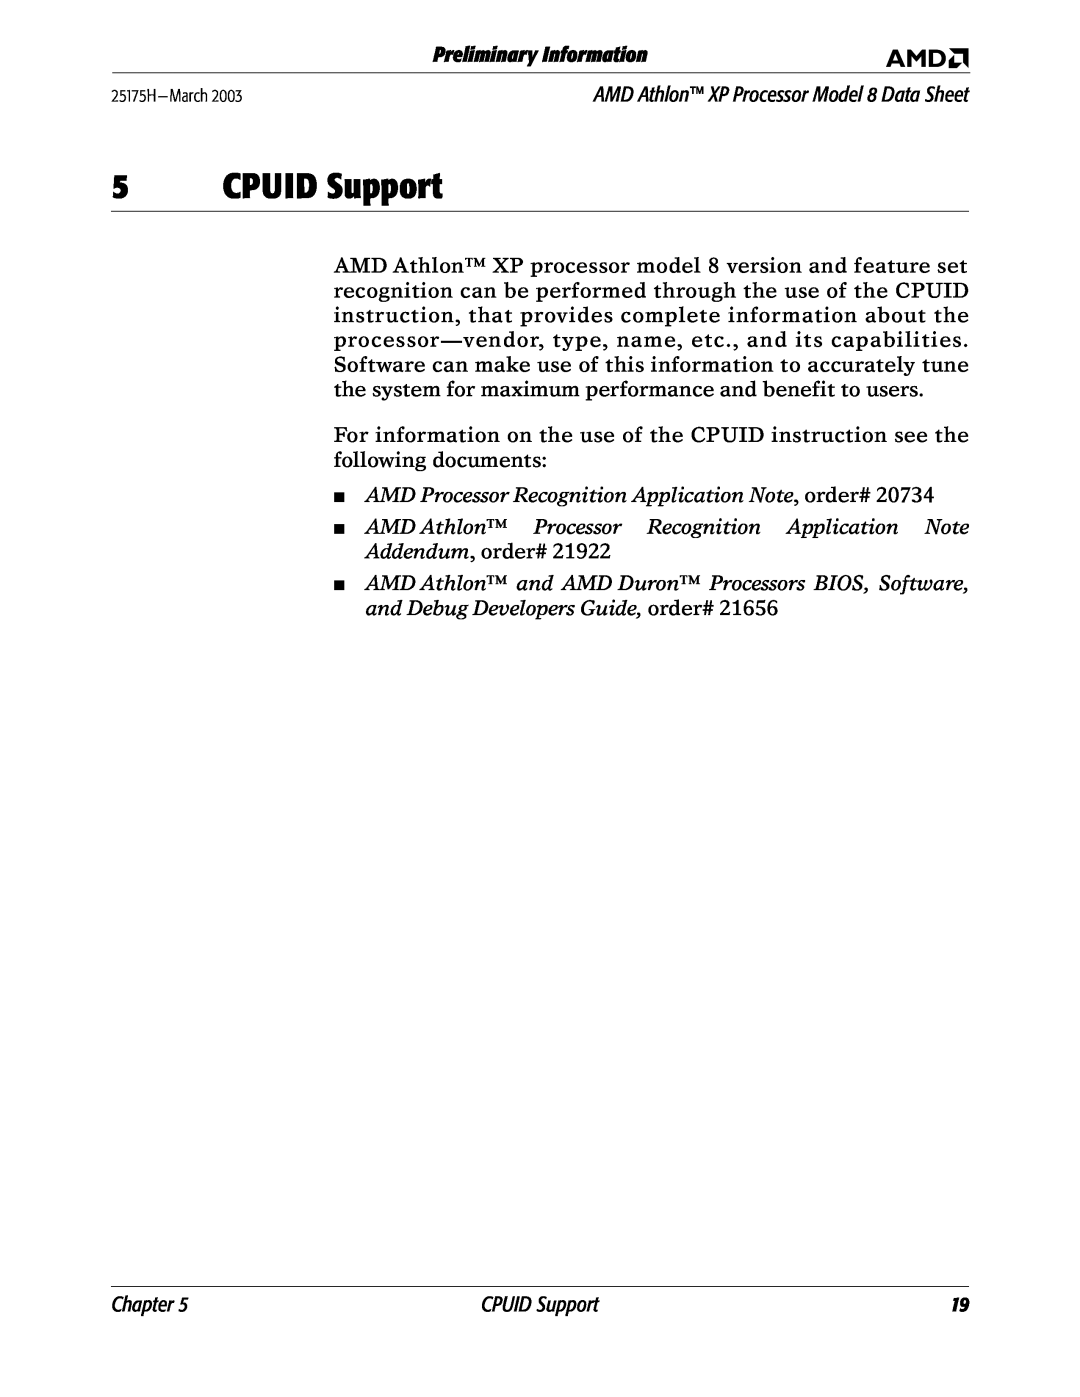 AMD 8 manual CPUID Support, AMD Processor Recognition Application Note, order#, Preliminary Information, Chapter 